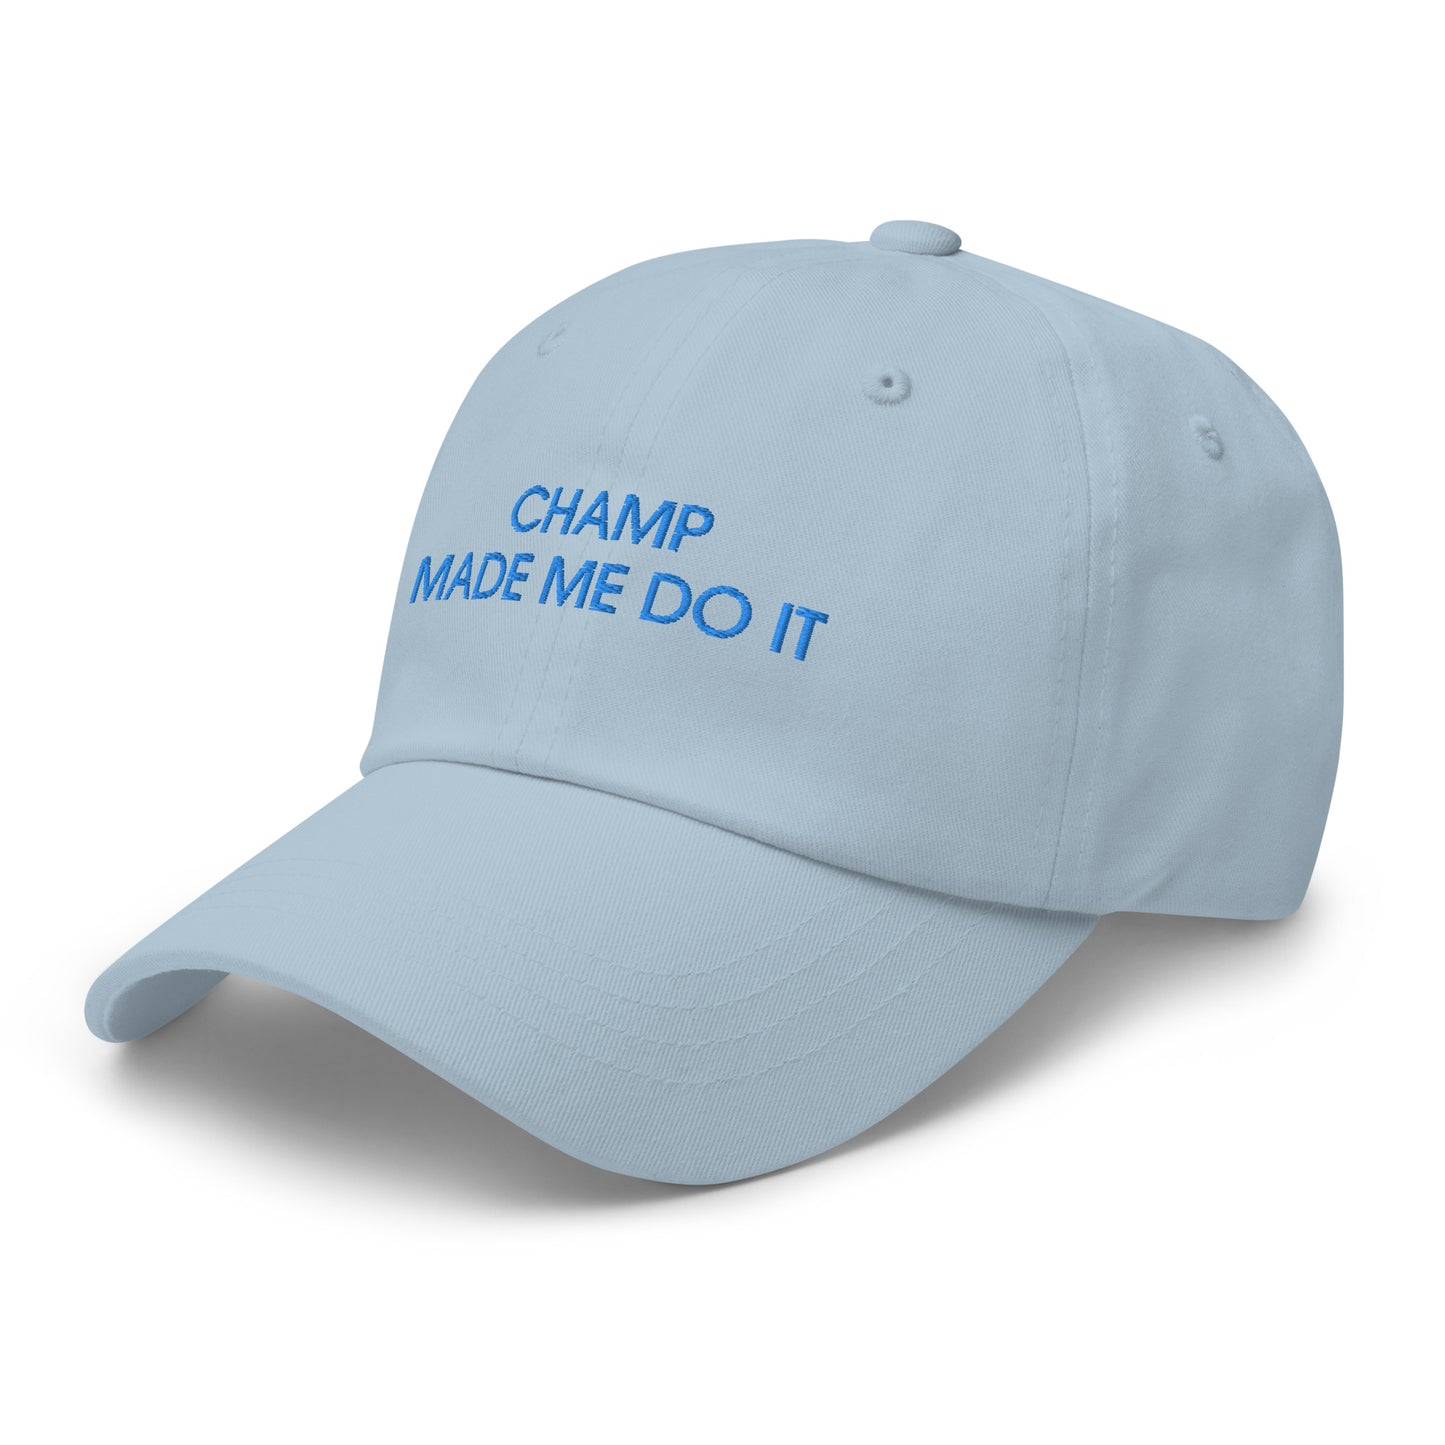 champ made me dad hat